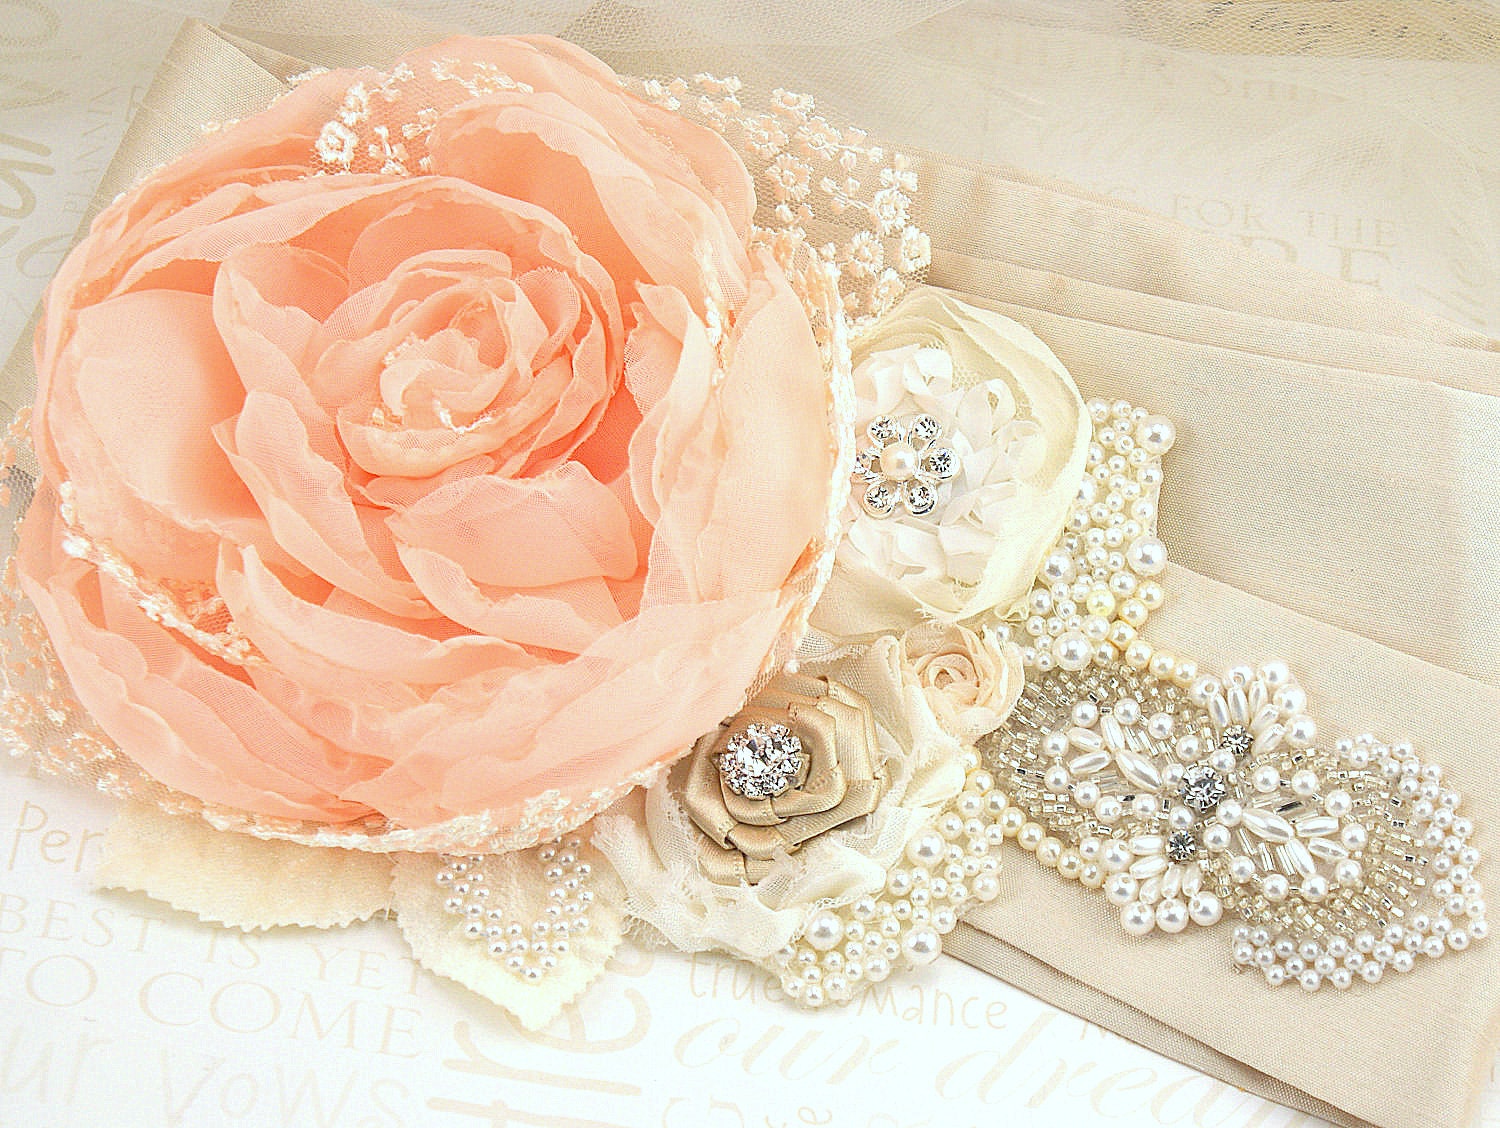 Bridal Sash - Wedding Sash in Peach, Nude, Champagne and Ivory Vintage Inspired with Lace, Chiffon Pearls- Pearl Queen - SolBijou